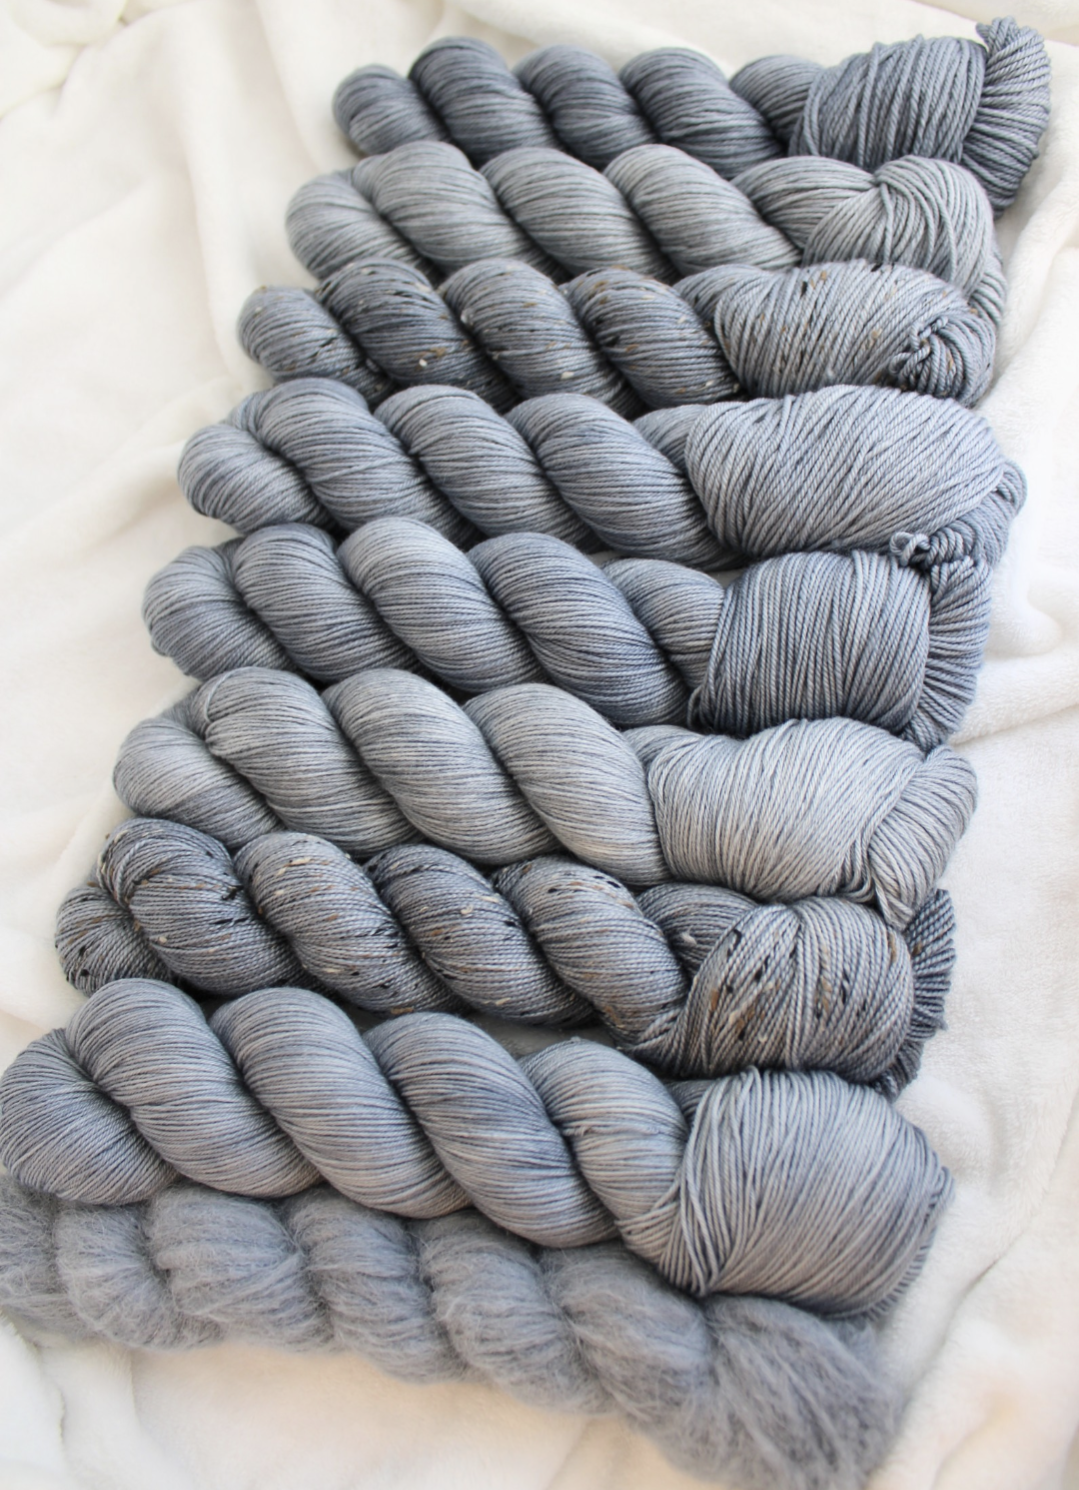 Storm Cloud - Sweater Quantity (multiples of 2)